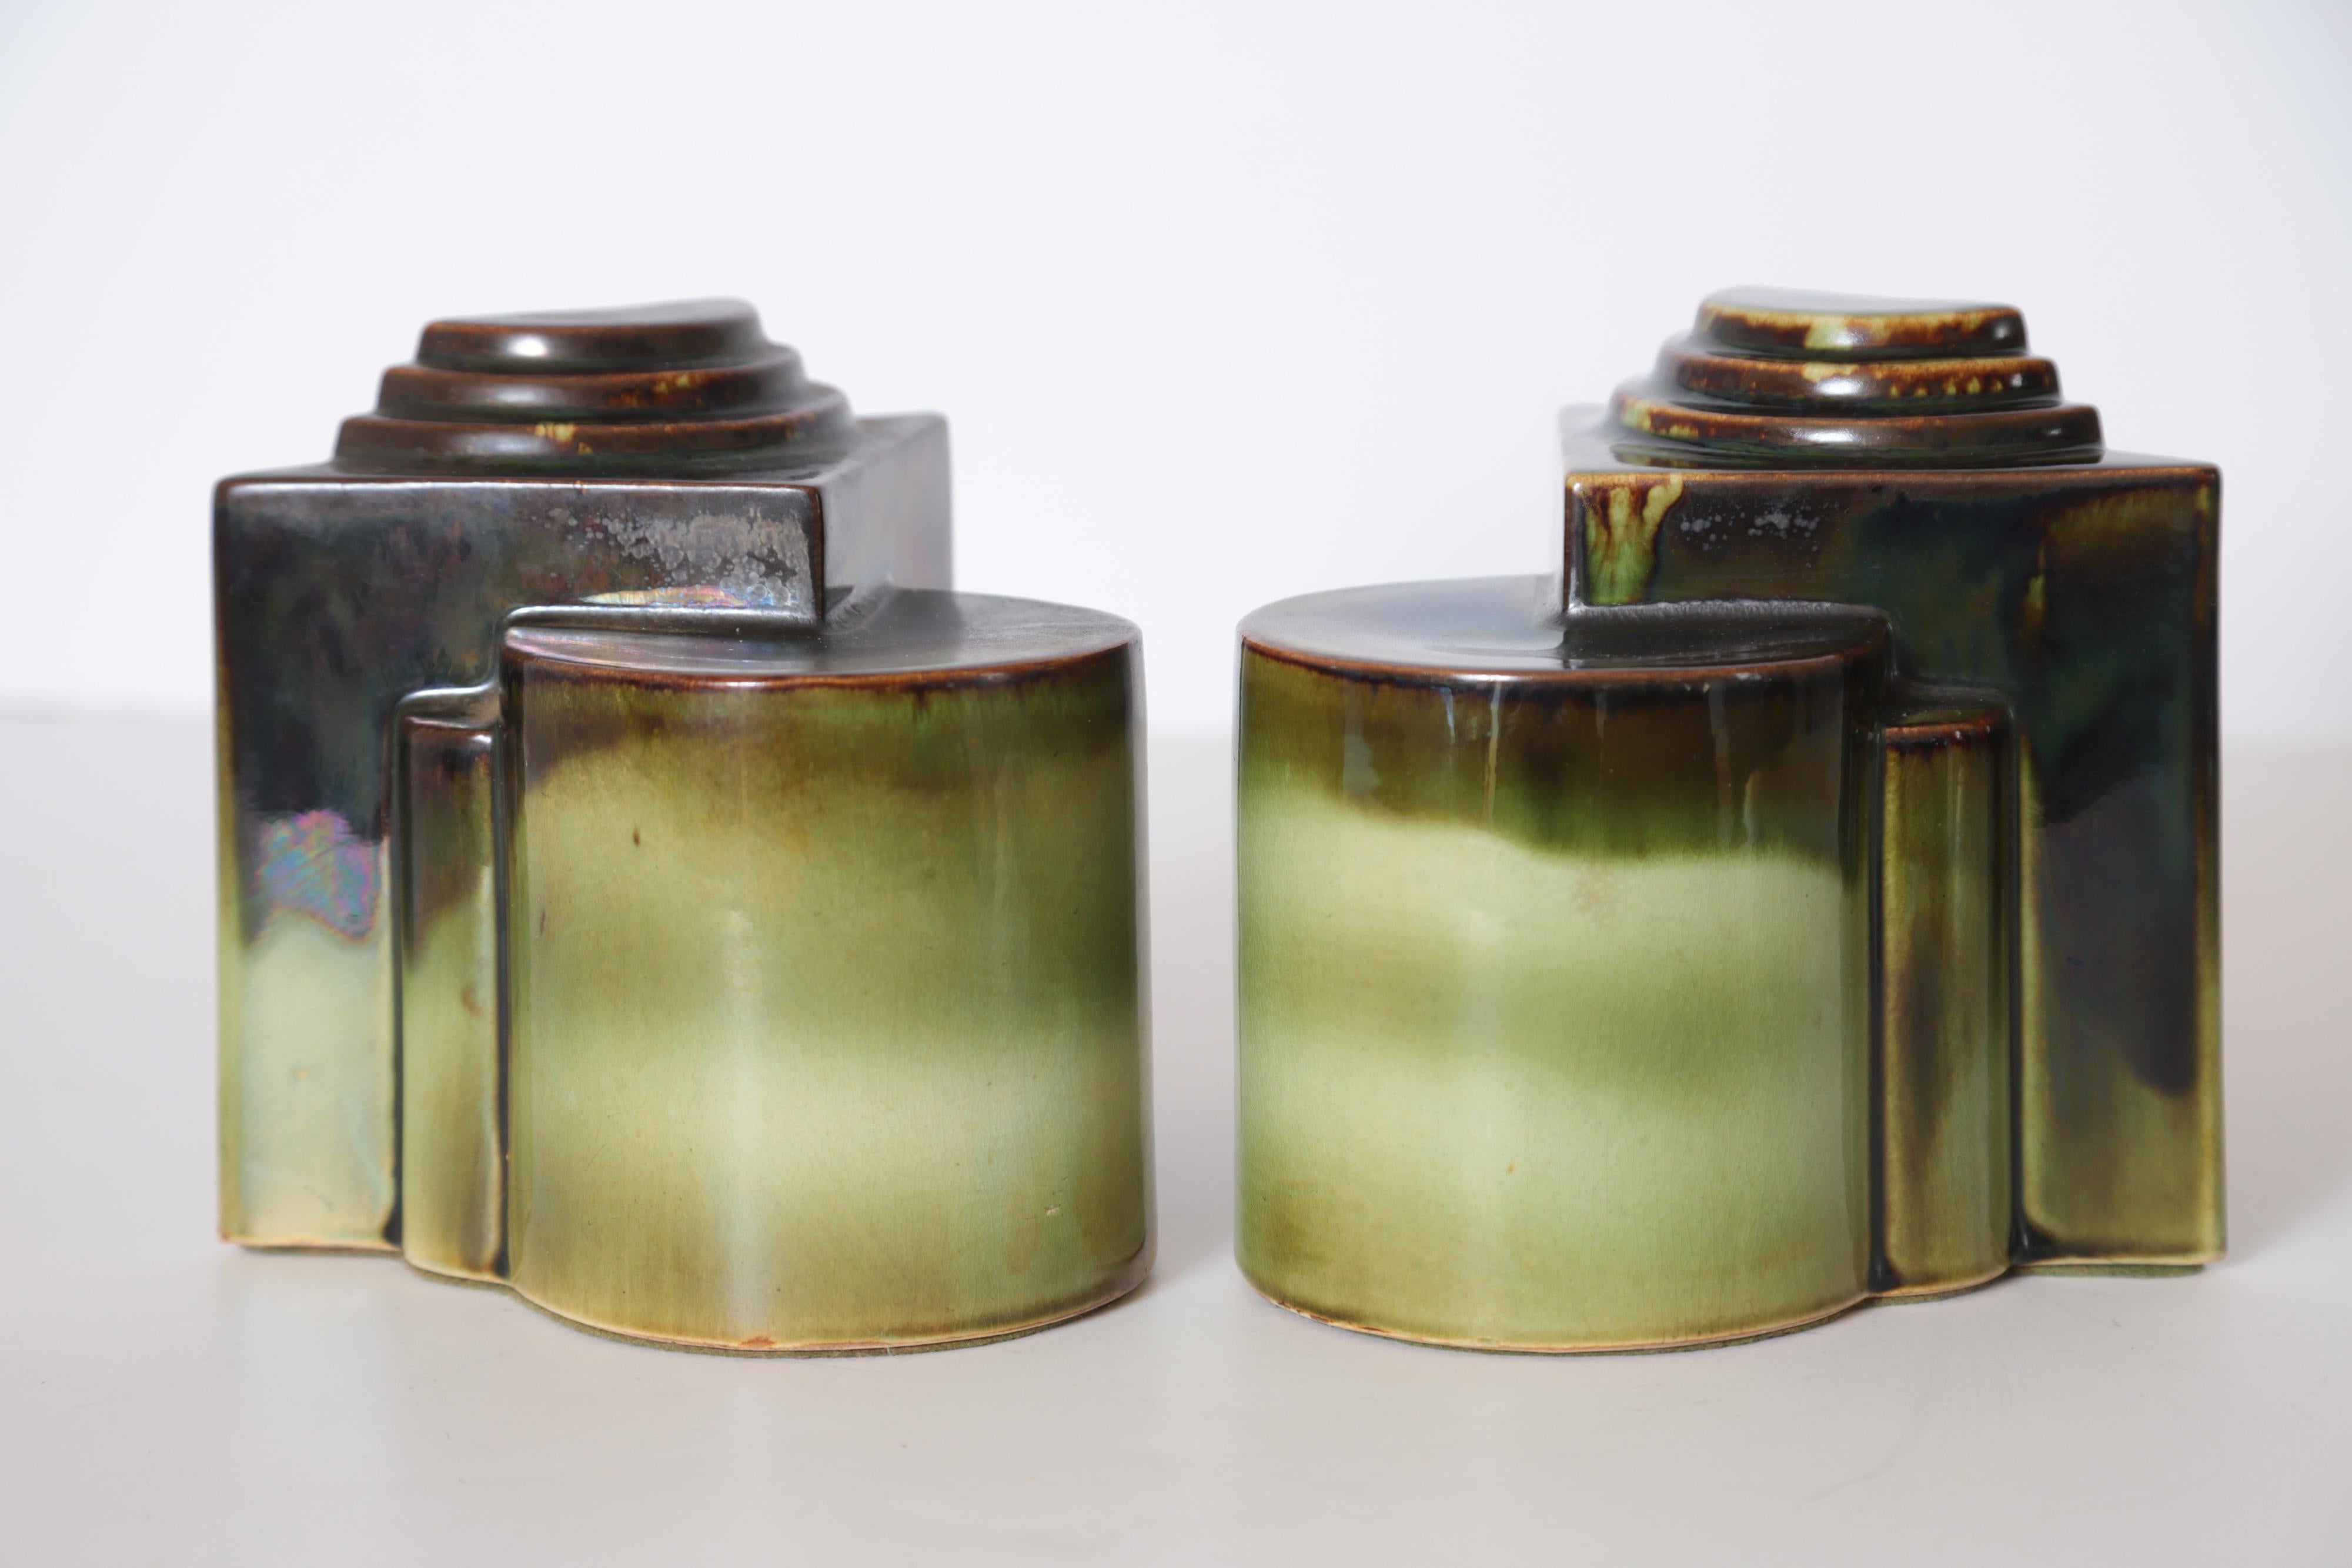 Glazed Art Deco Gale Turnbull for Leigh Potters Bookends, circa 1929, Leigh Art Ware